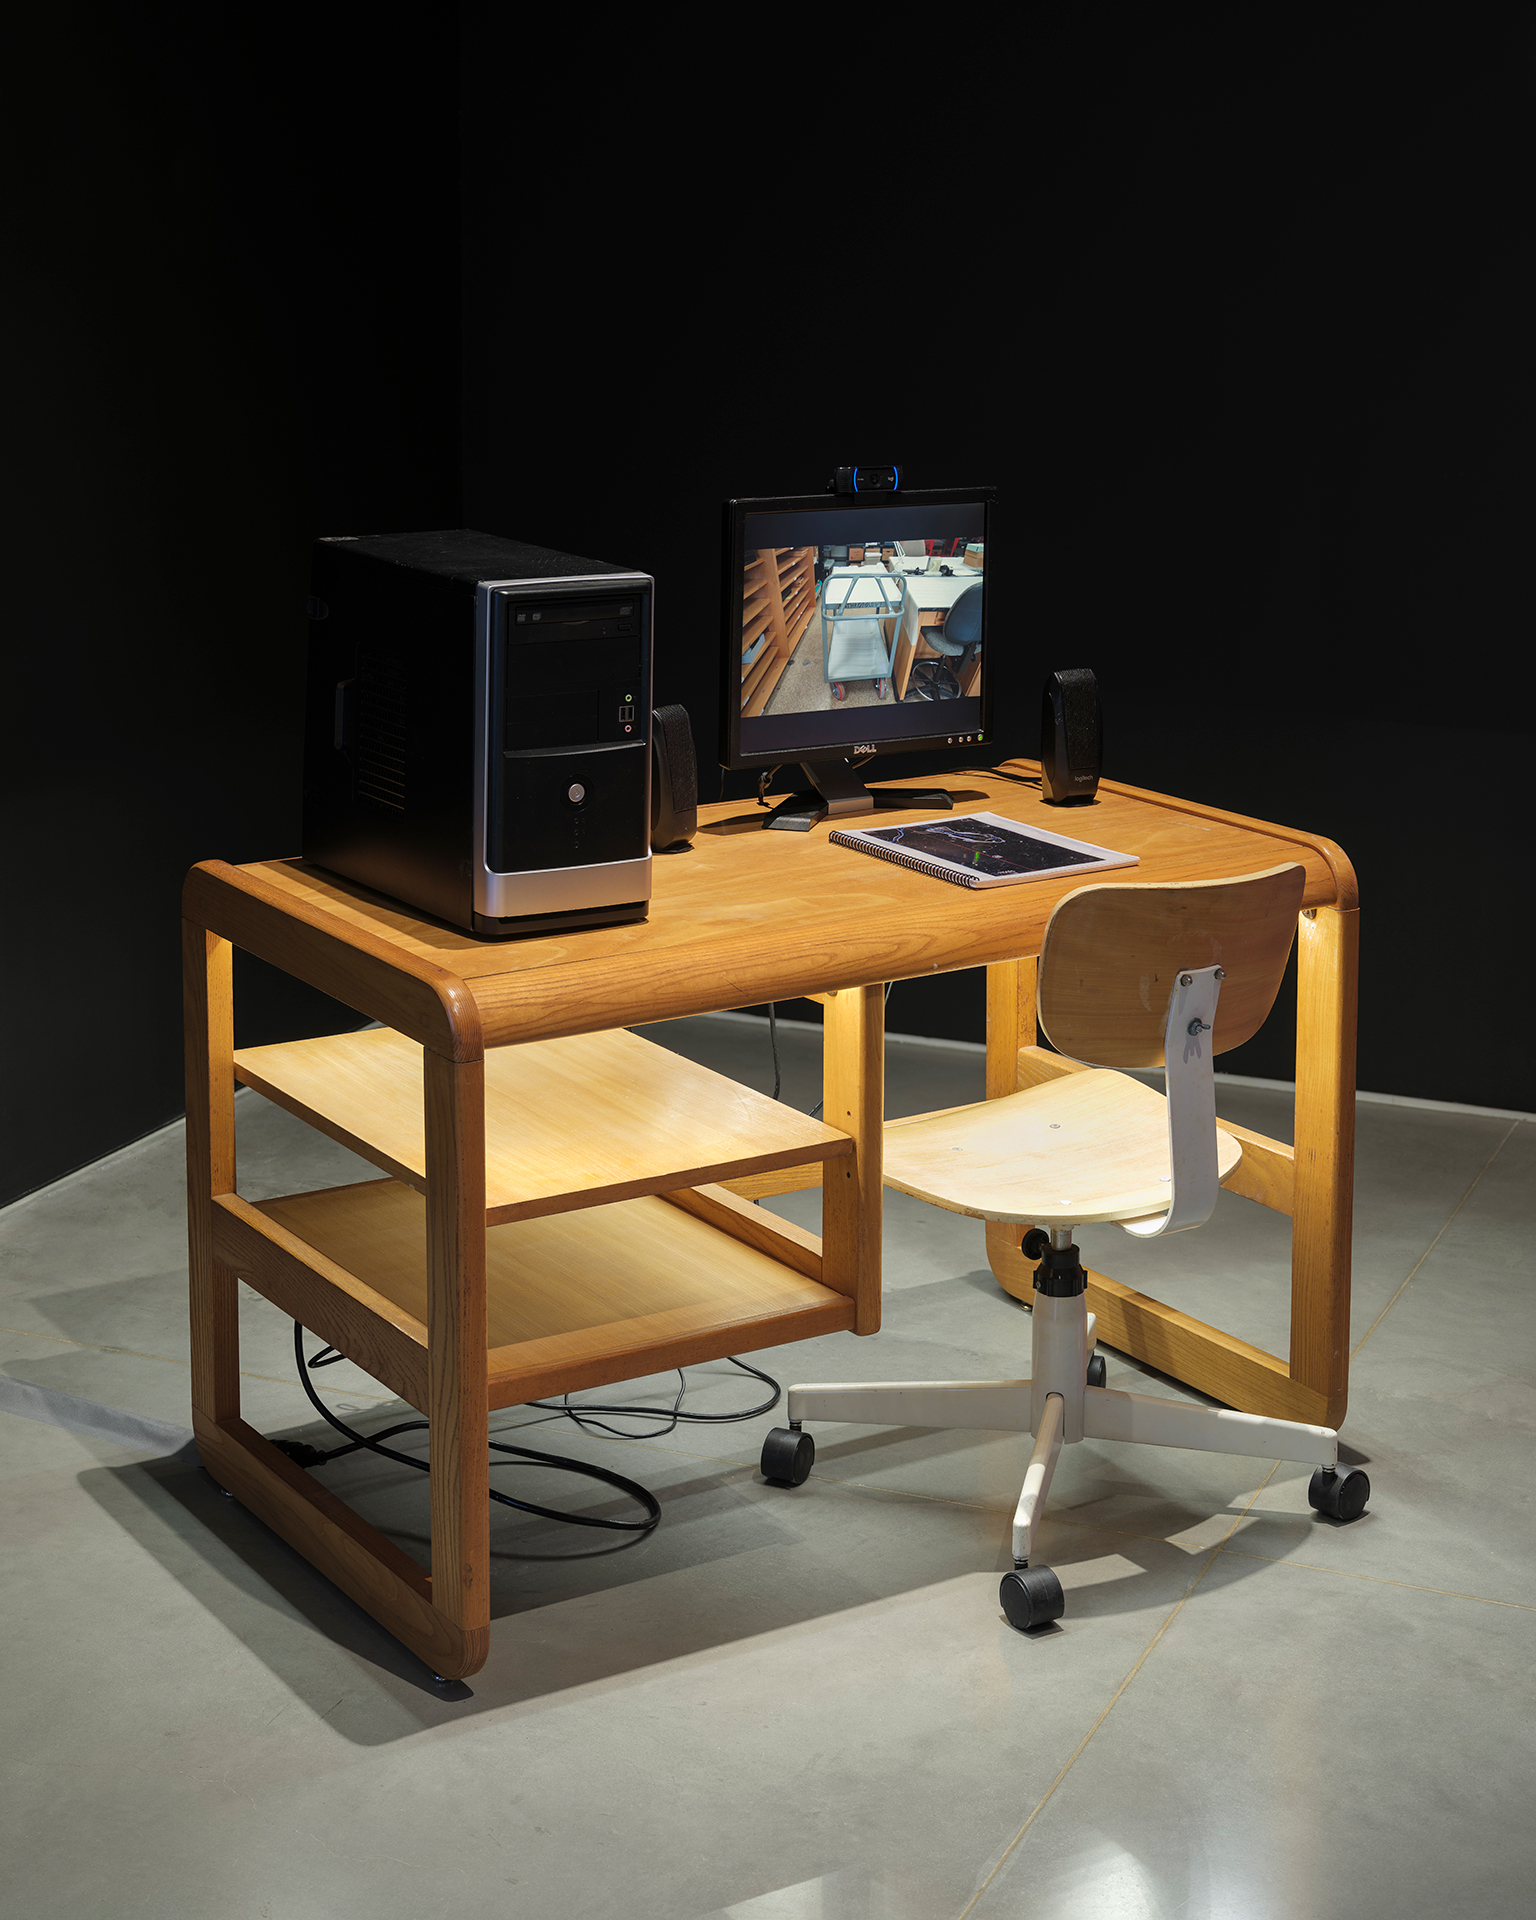 A wooden desk and matching chair holding a computer with monitor and speakers, as well as a spiral bound packet of paper. The monitor shows an image of an archive.